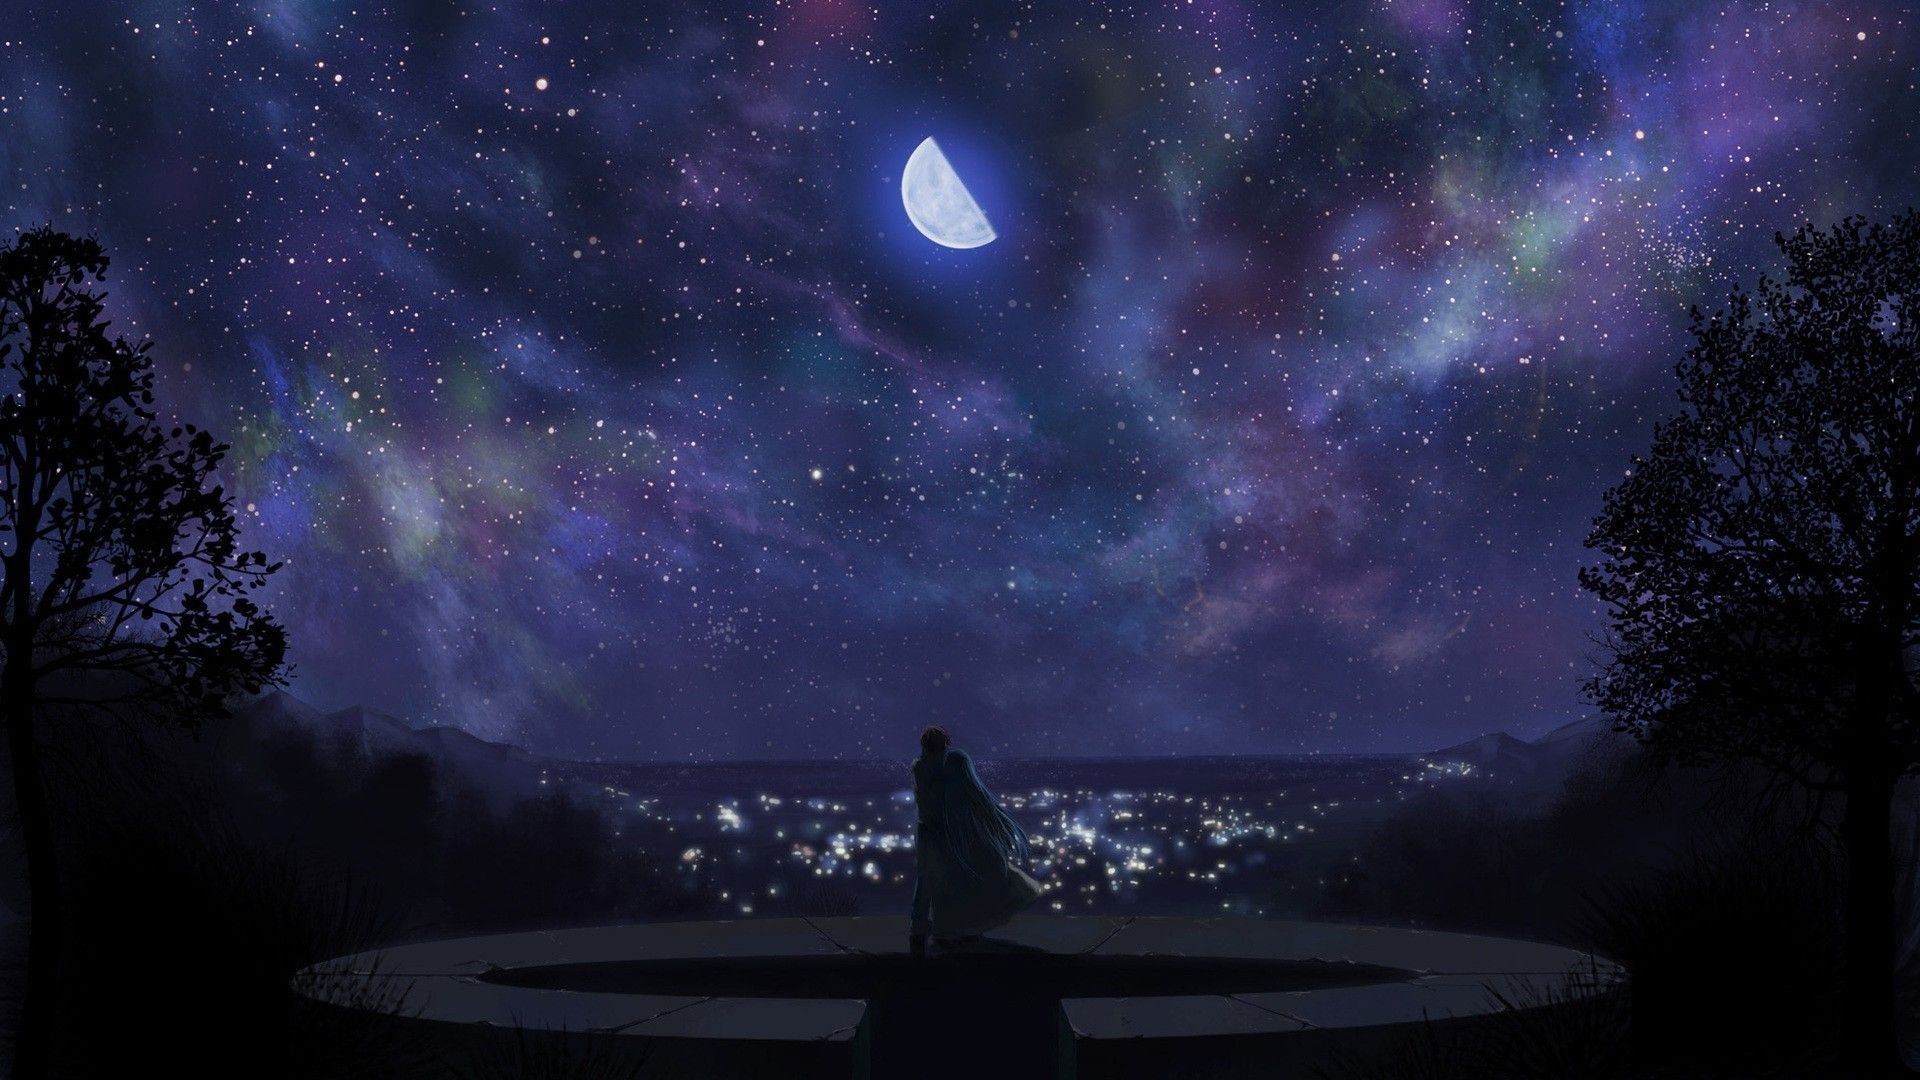 Wonderful view of anime girl sitting in the sky with half moon and star  view 4K wallpaper download